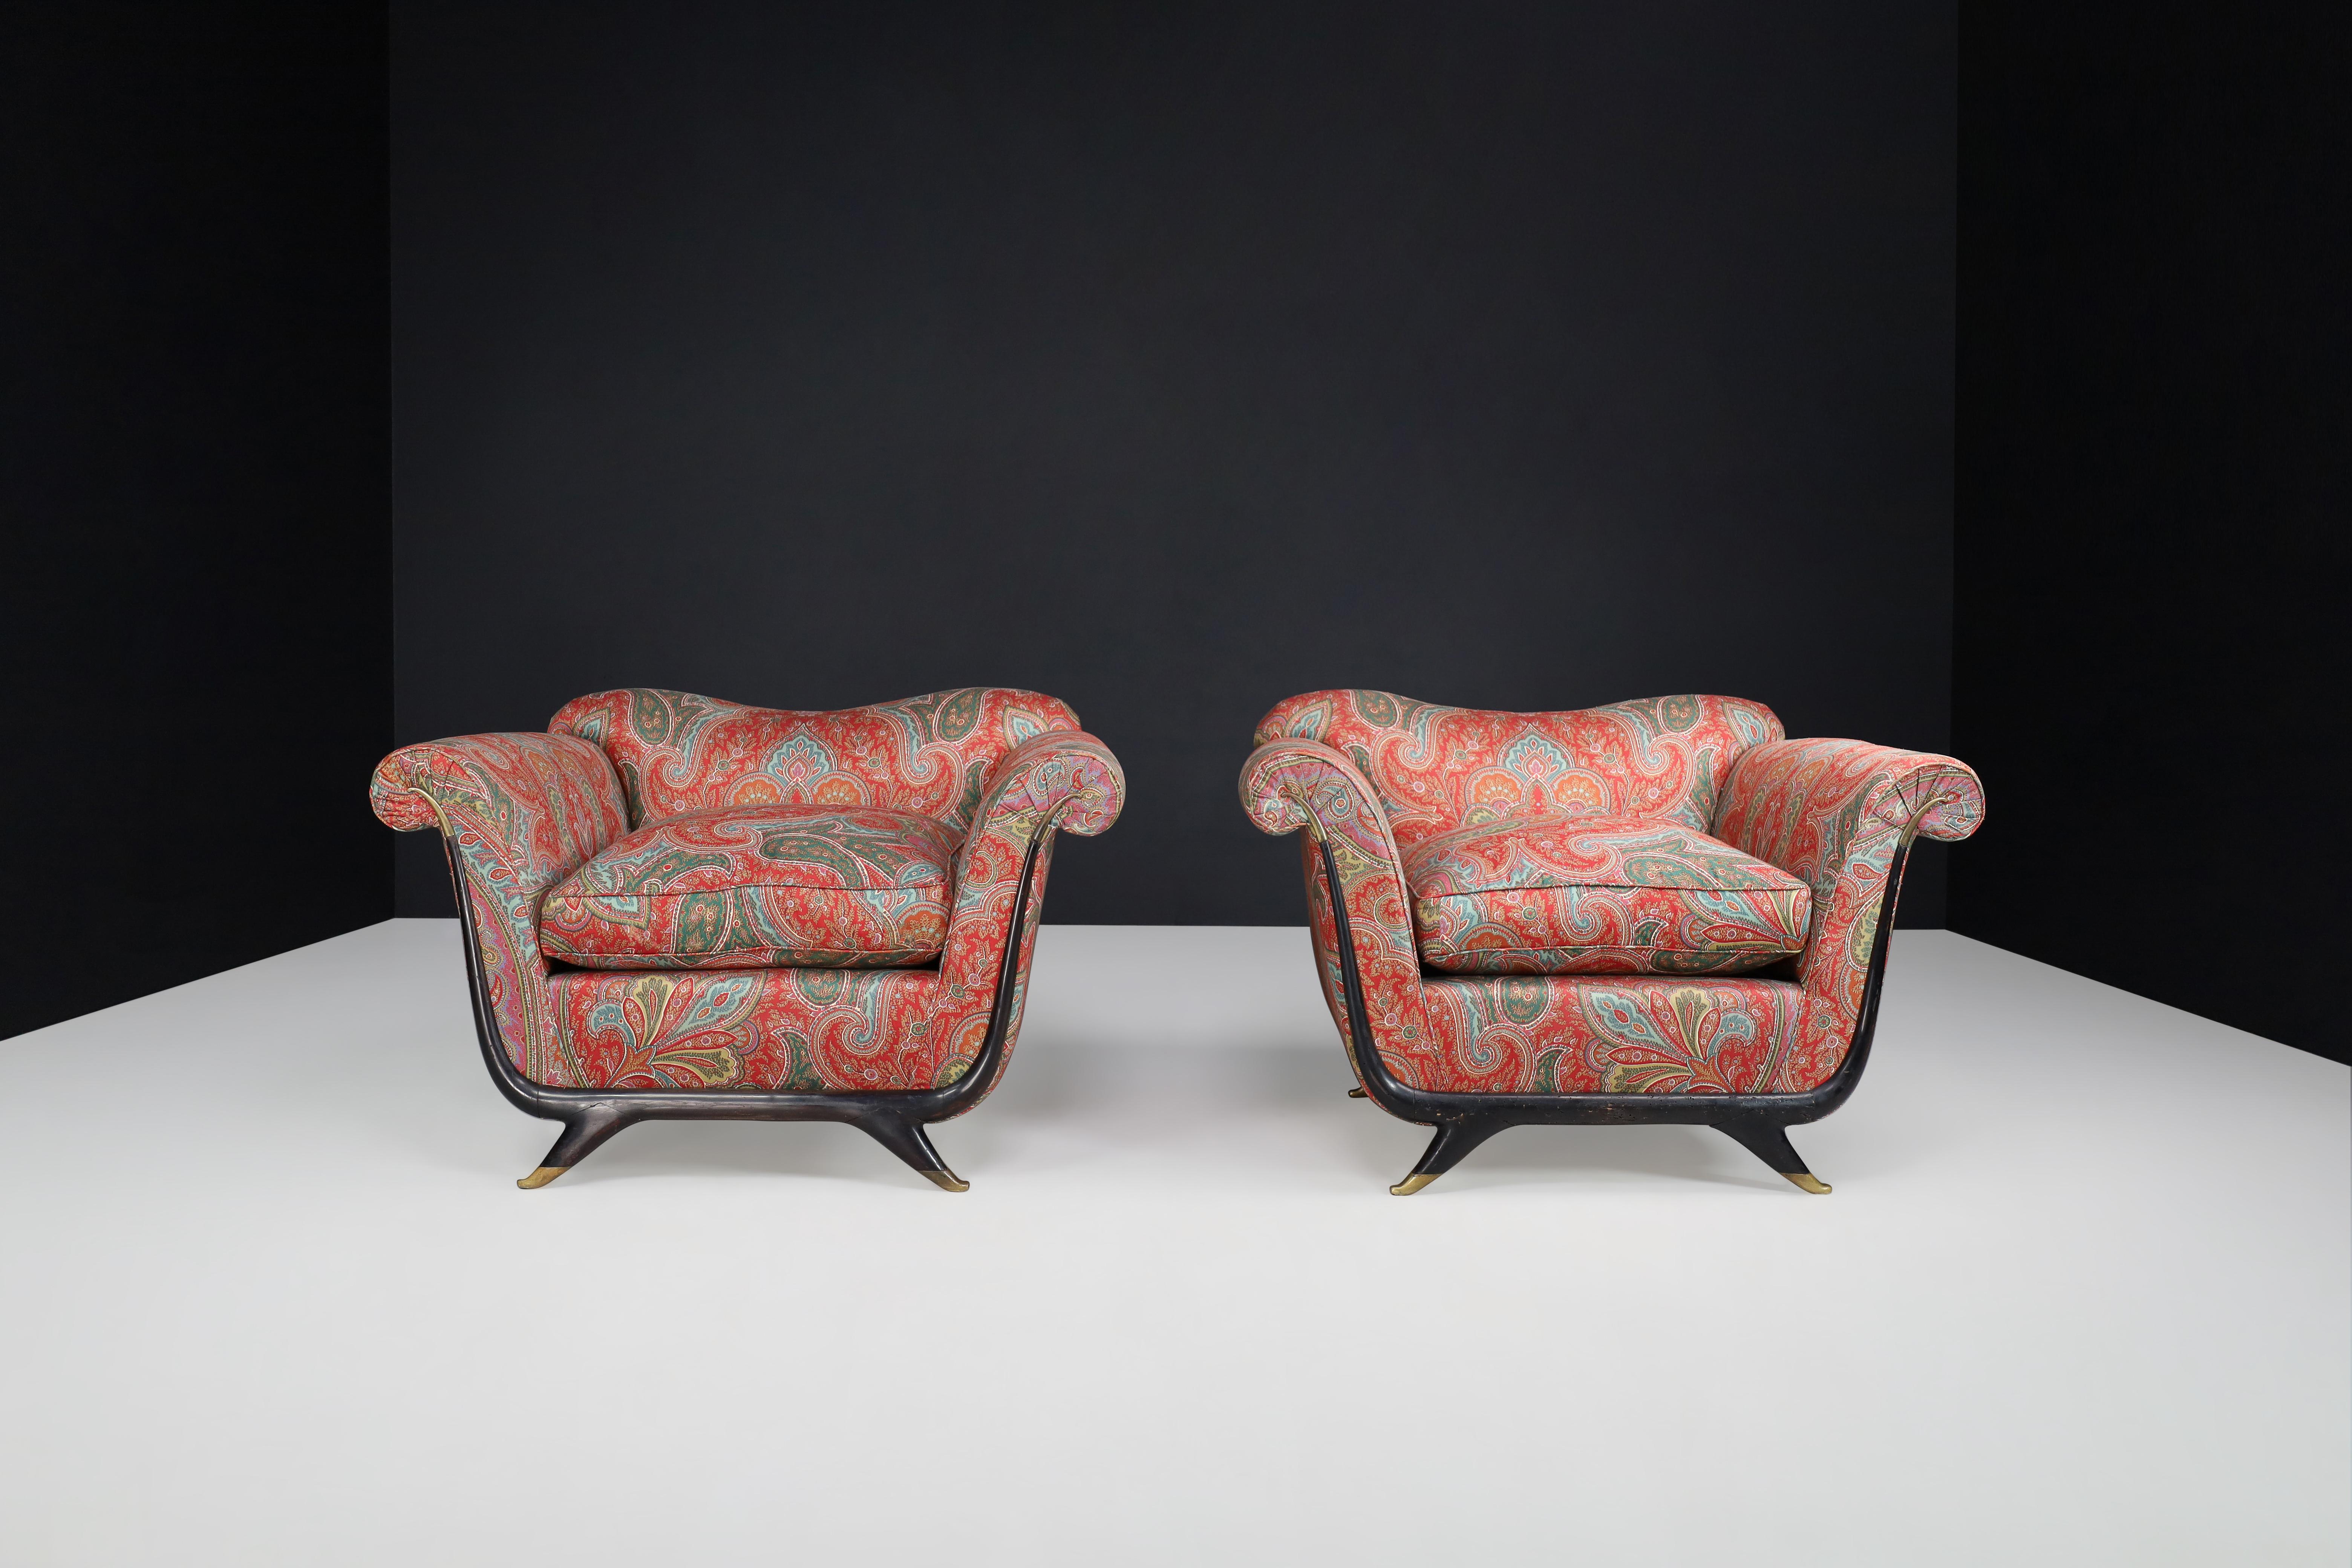 Guglielmo Ulrich Lounge Chairs in Walnut, Fabric, and Brass, Italy, 1930s  For Sale 1